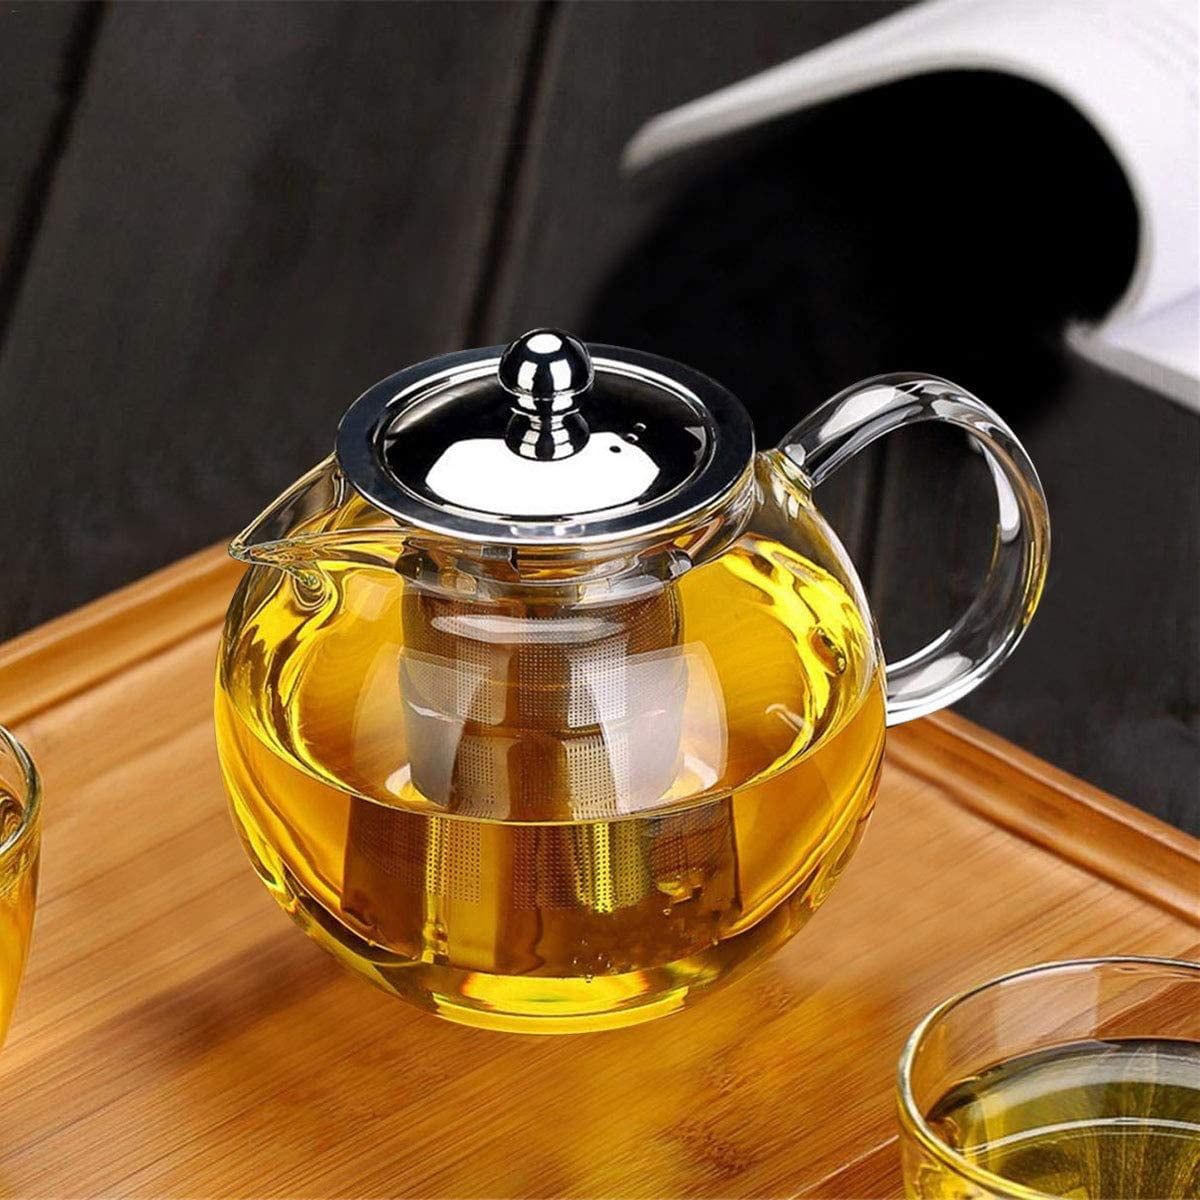 Venoly Stainless Steel Tea Pot With Removable Infuser For Loose Leaf and  Tea Bags, Dishwasher Safe and Heat Resistant, 1 Liter